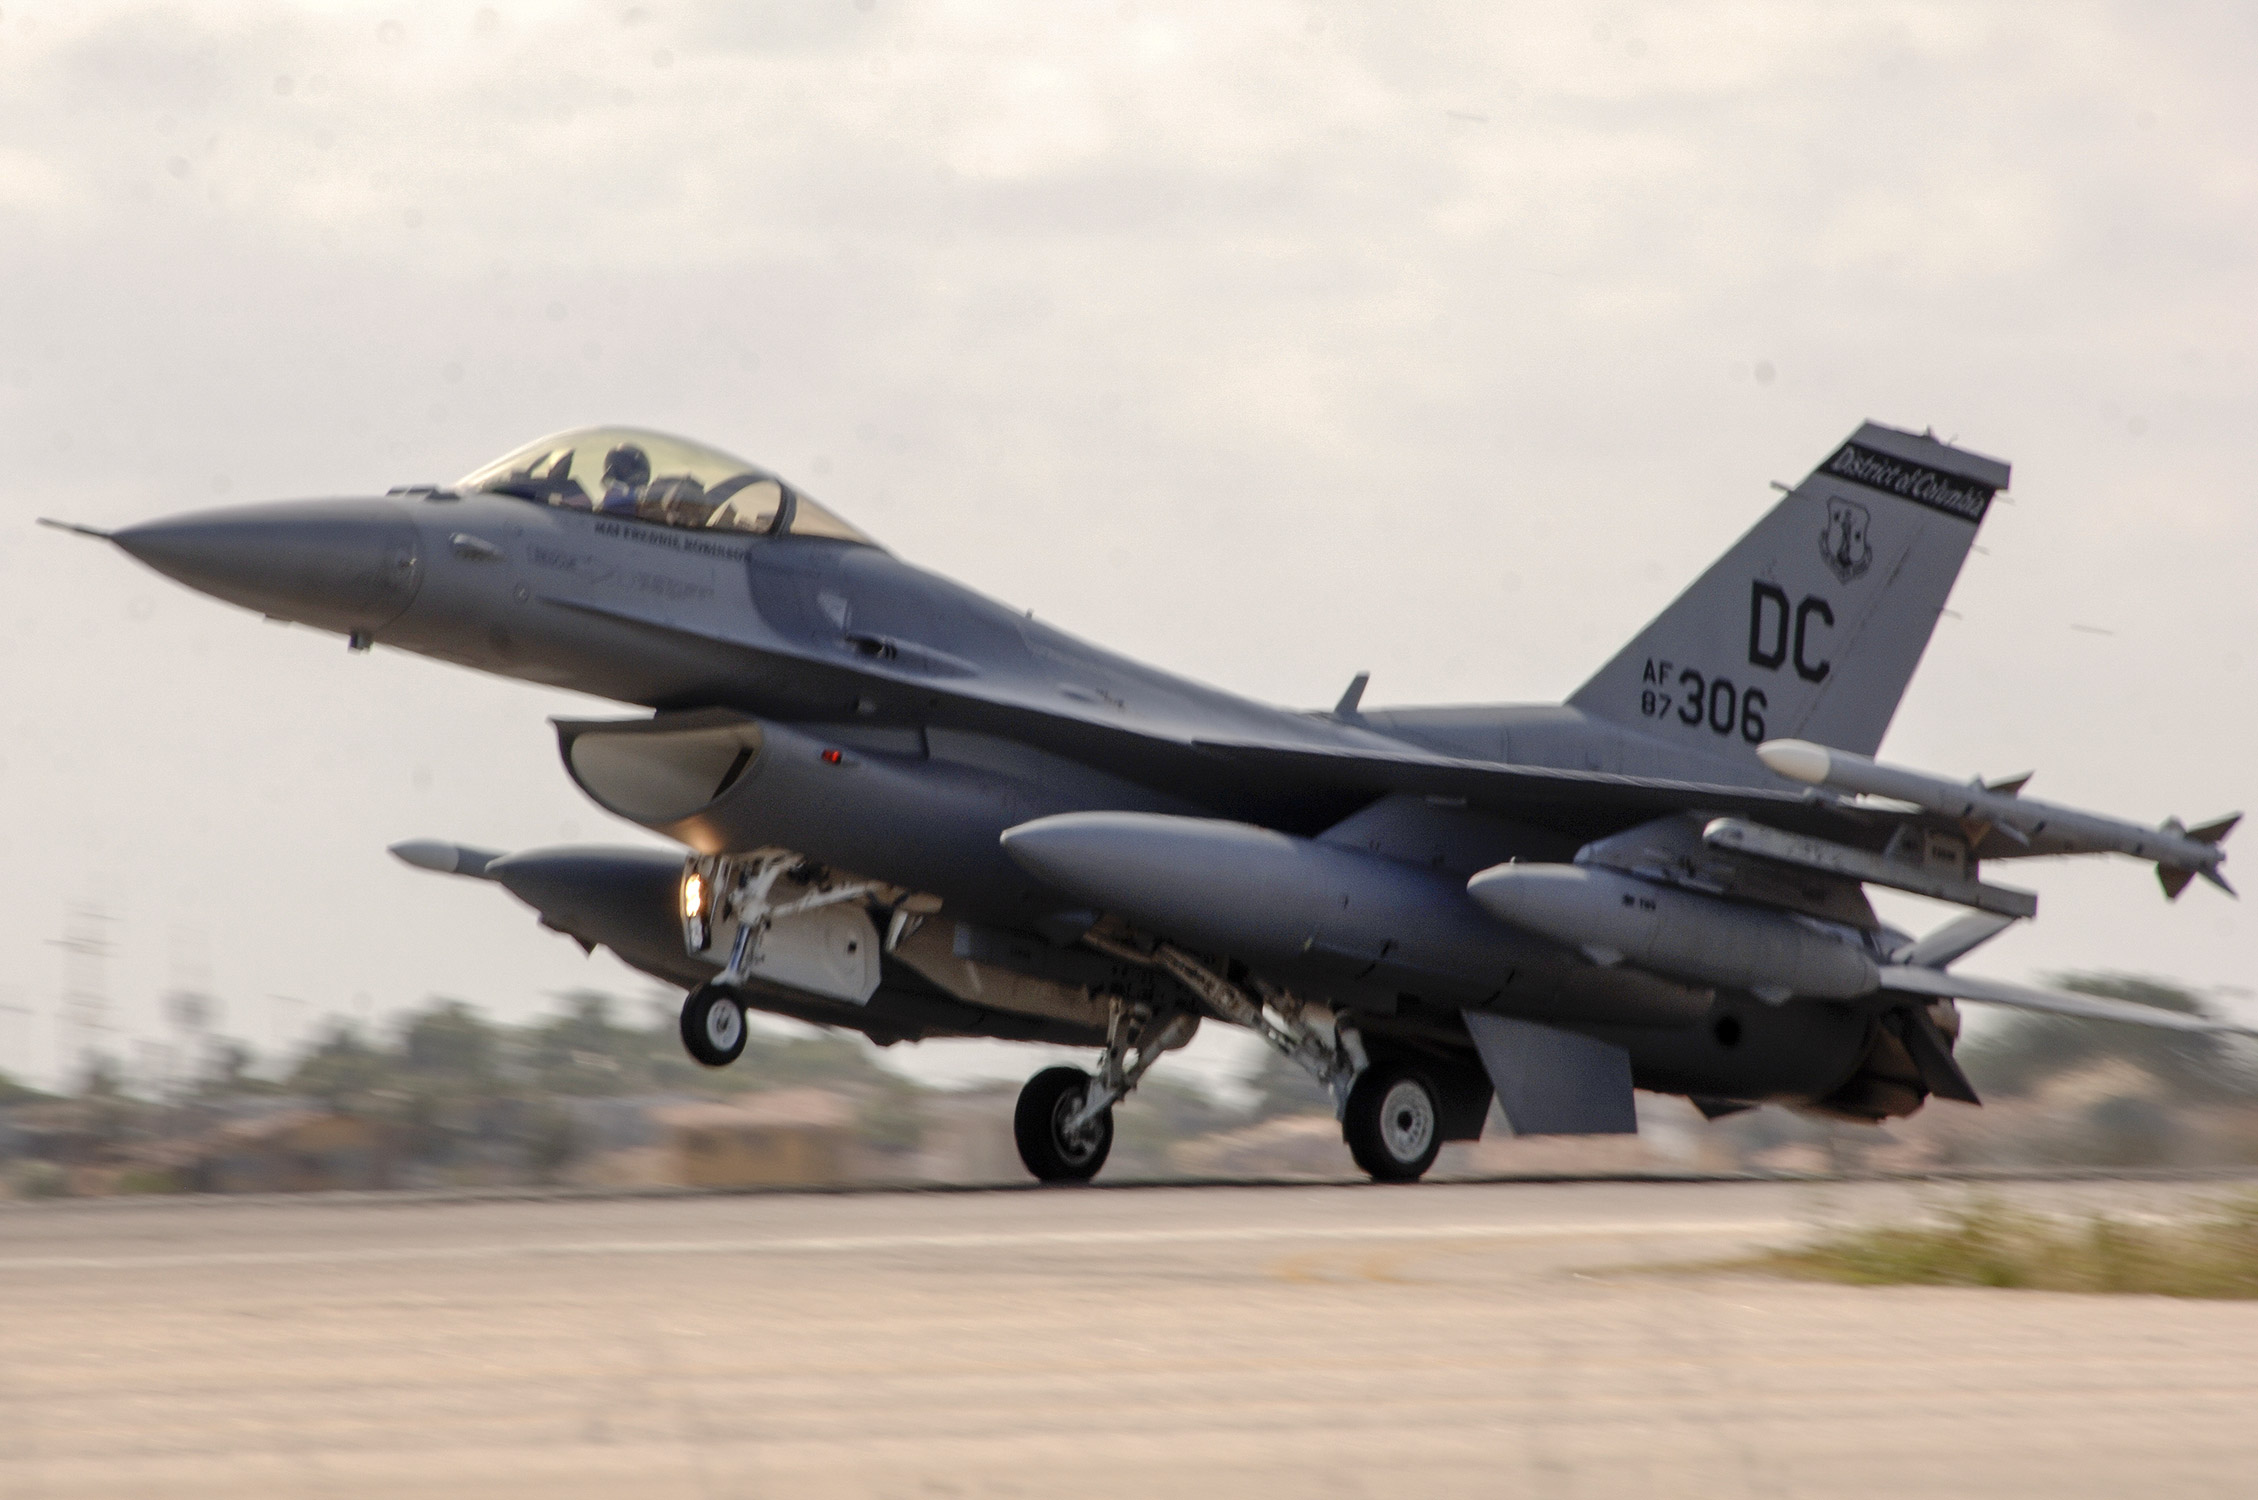 F-16C aircraft that crashed on April 5, 2017